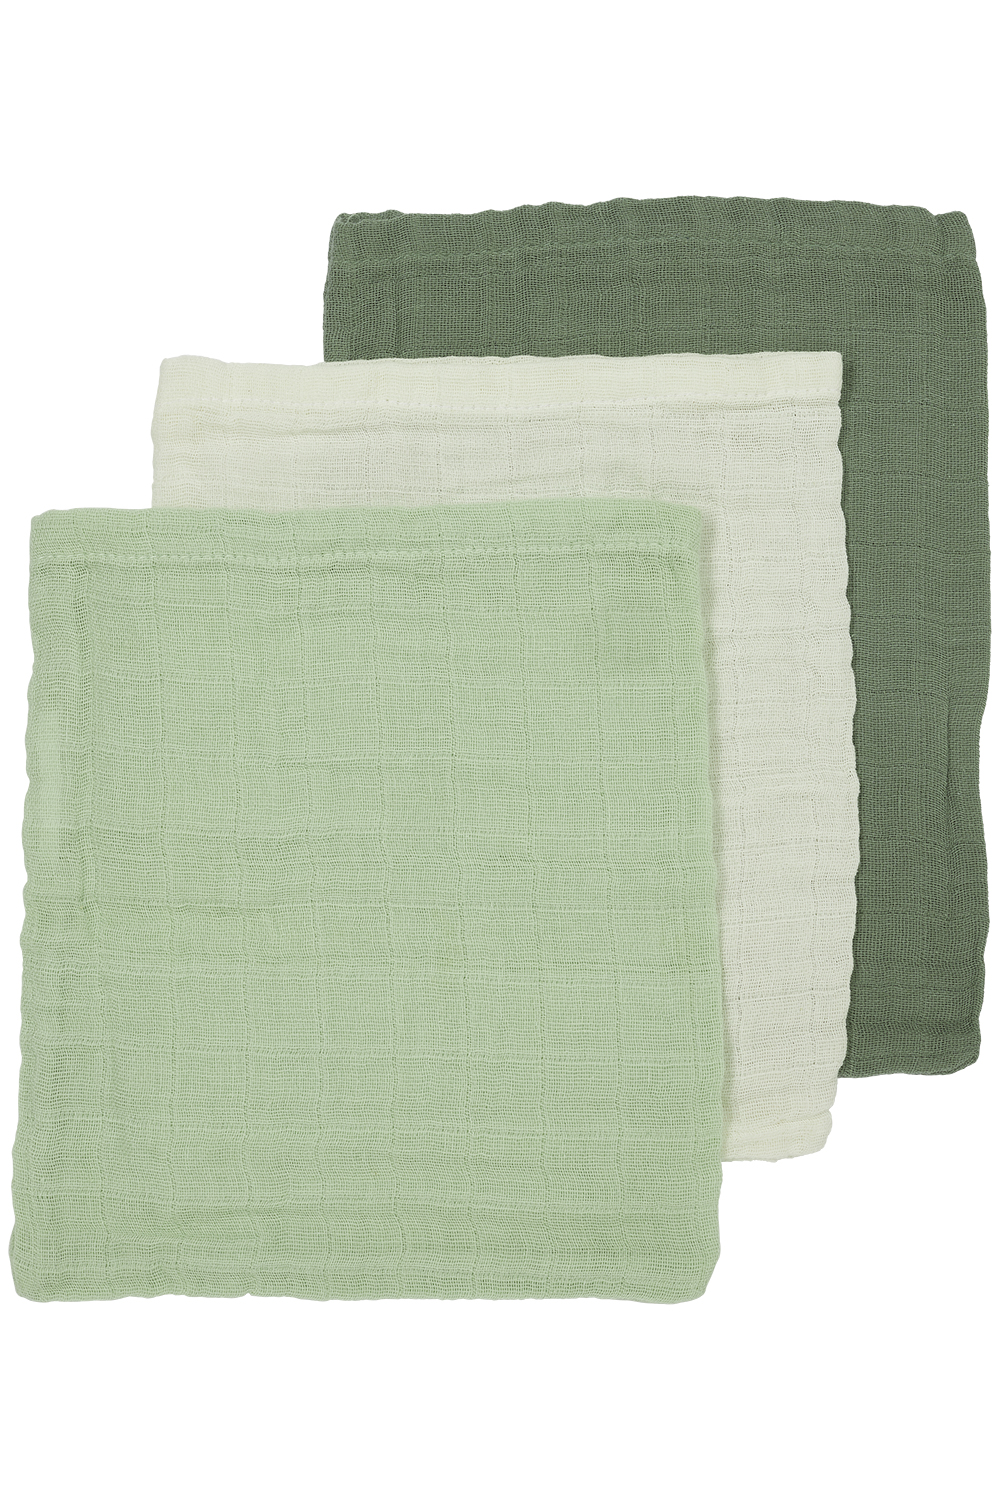 Washcloth 3-pack pre-washed muslin Uni - offwhite/soft green/forest green - 20x17cm